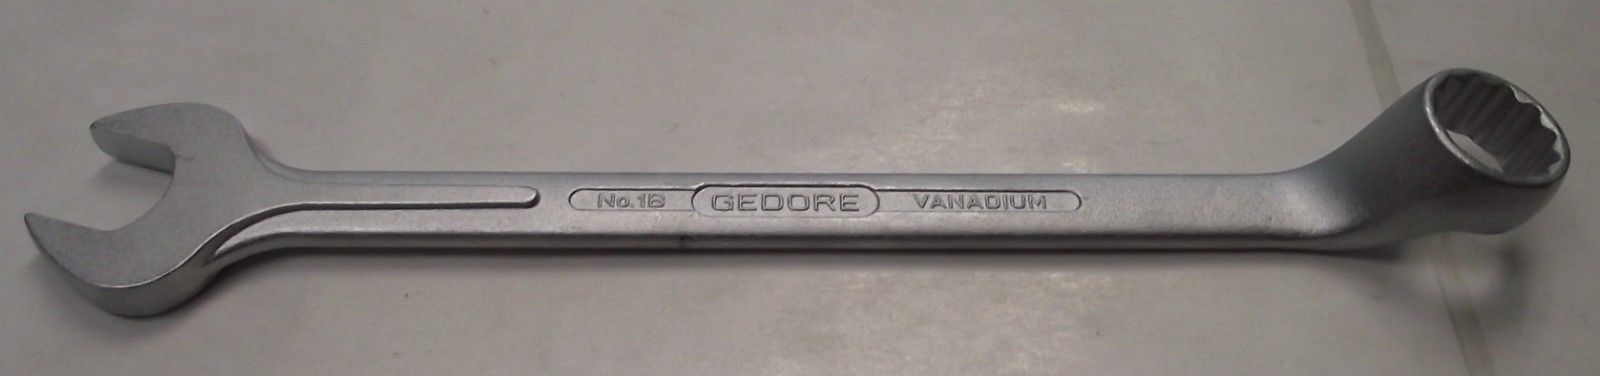 Gedore 6006010 1B 3/4" Combination Spanner Wrench Germany